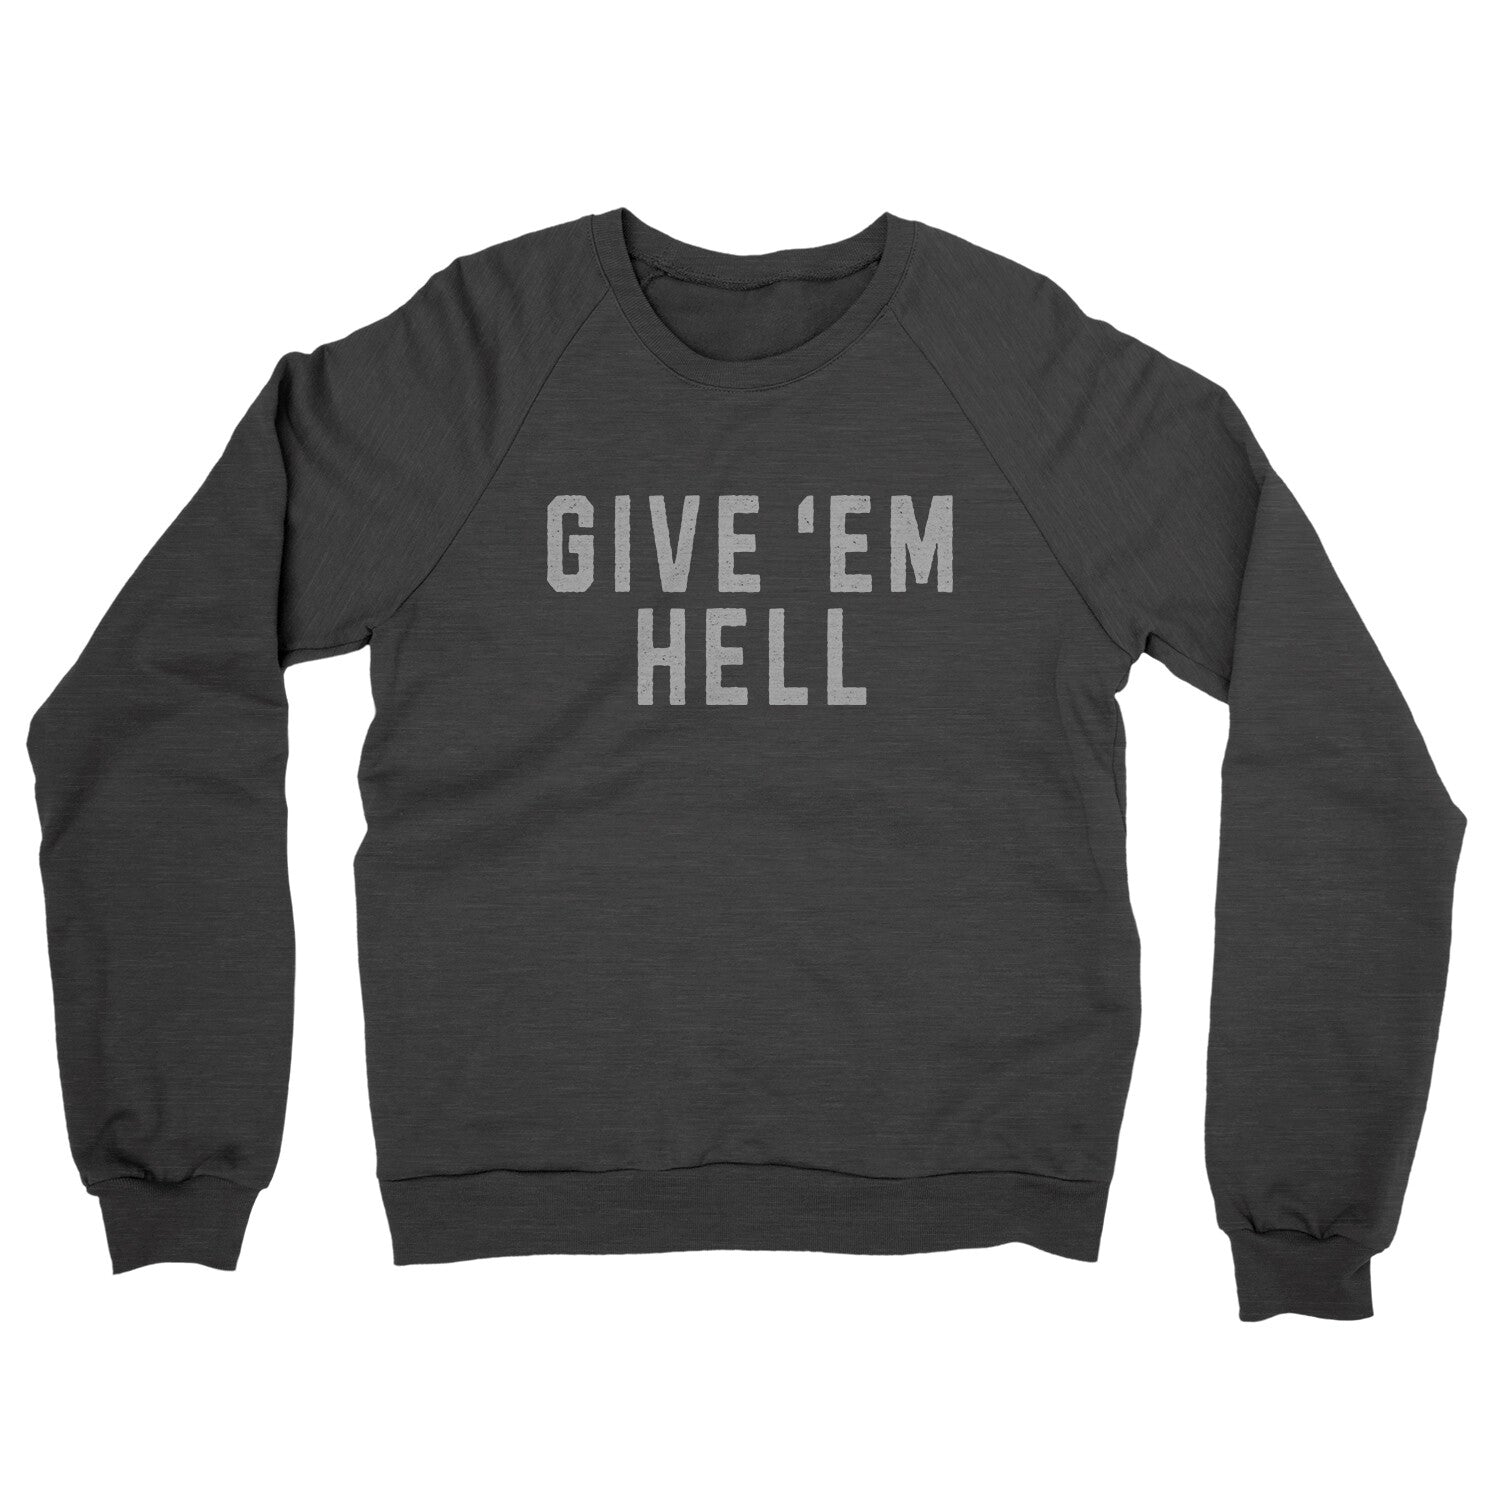 Give ‘em Hell in Charcoal Heather Color